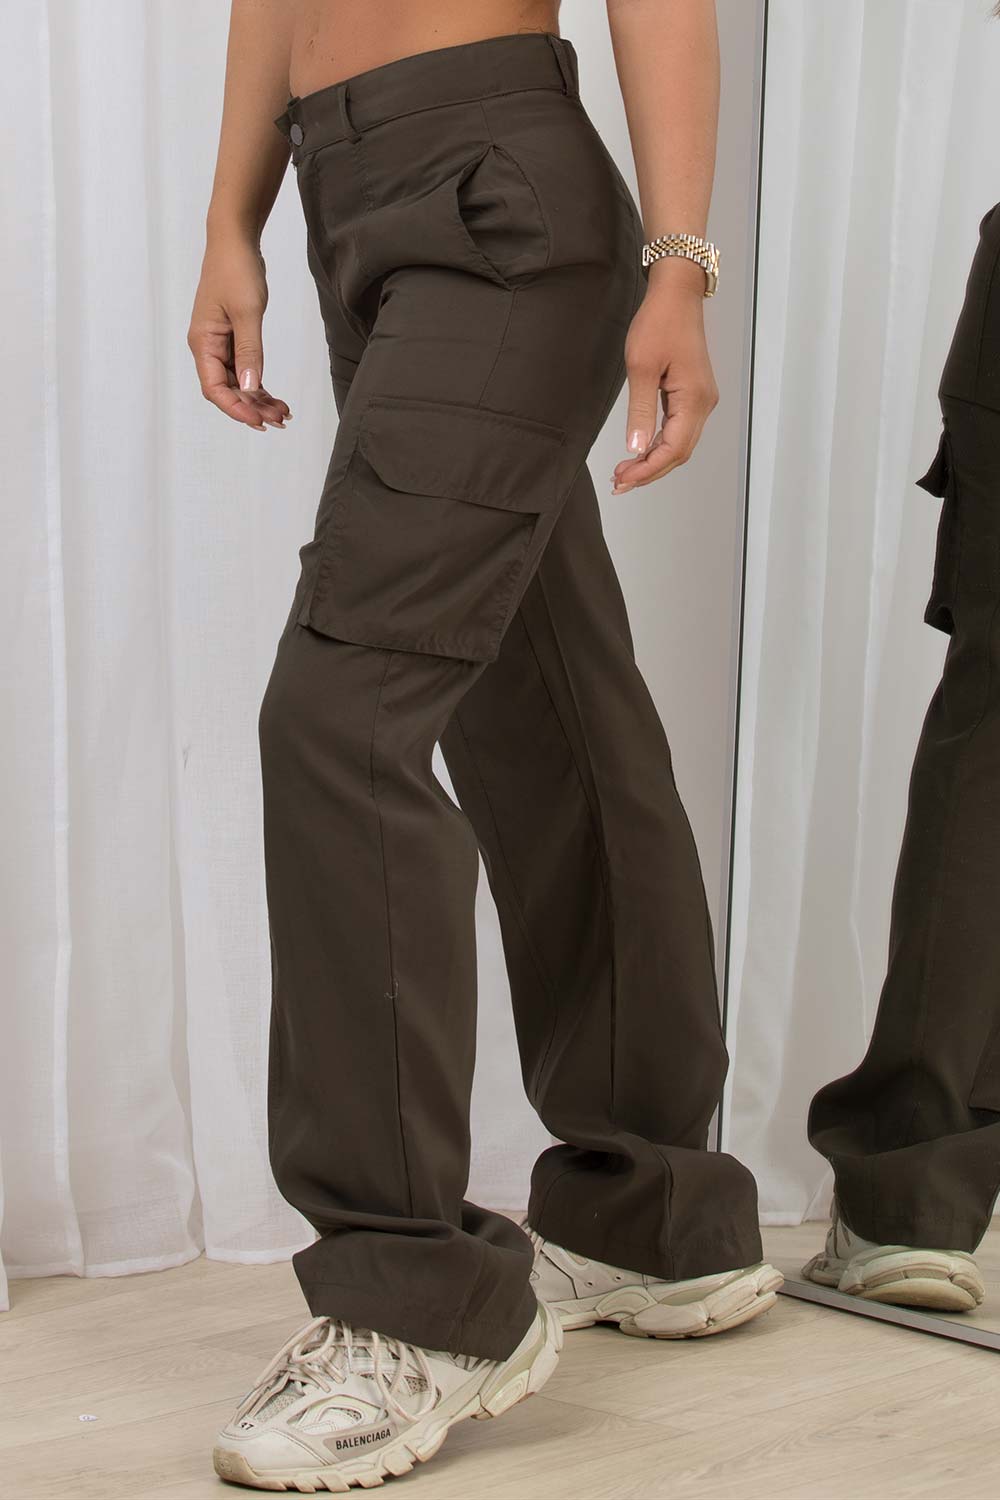 Stone Straight Leg Cuffed Pocket Cargo Trousers Laya  Femme Luxe  SilkFred